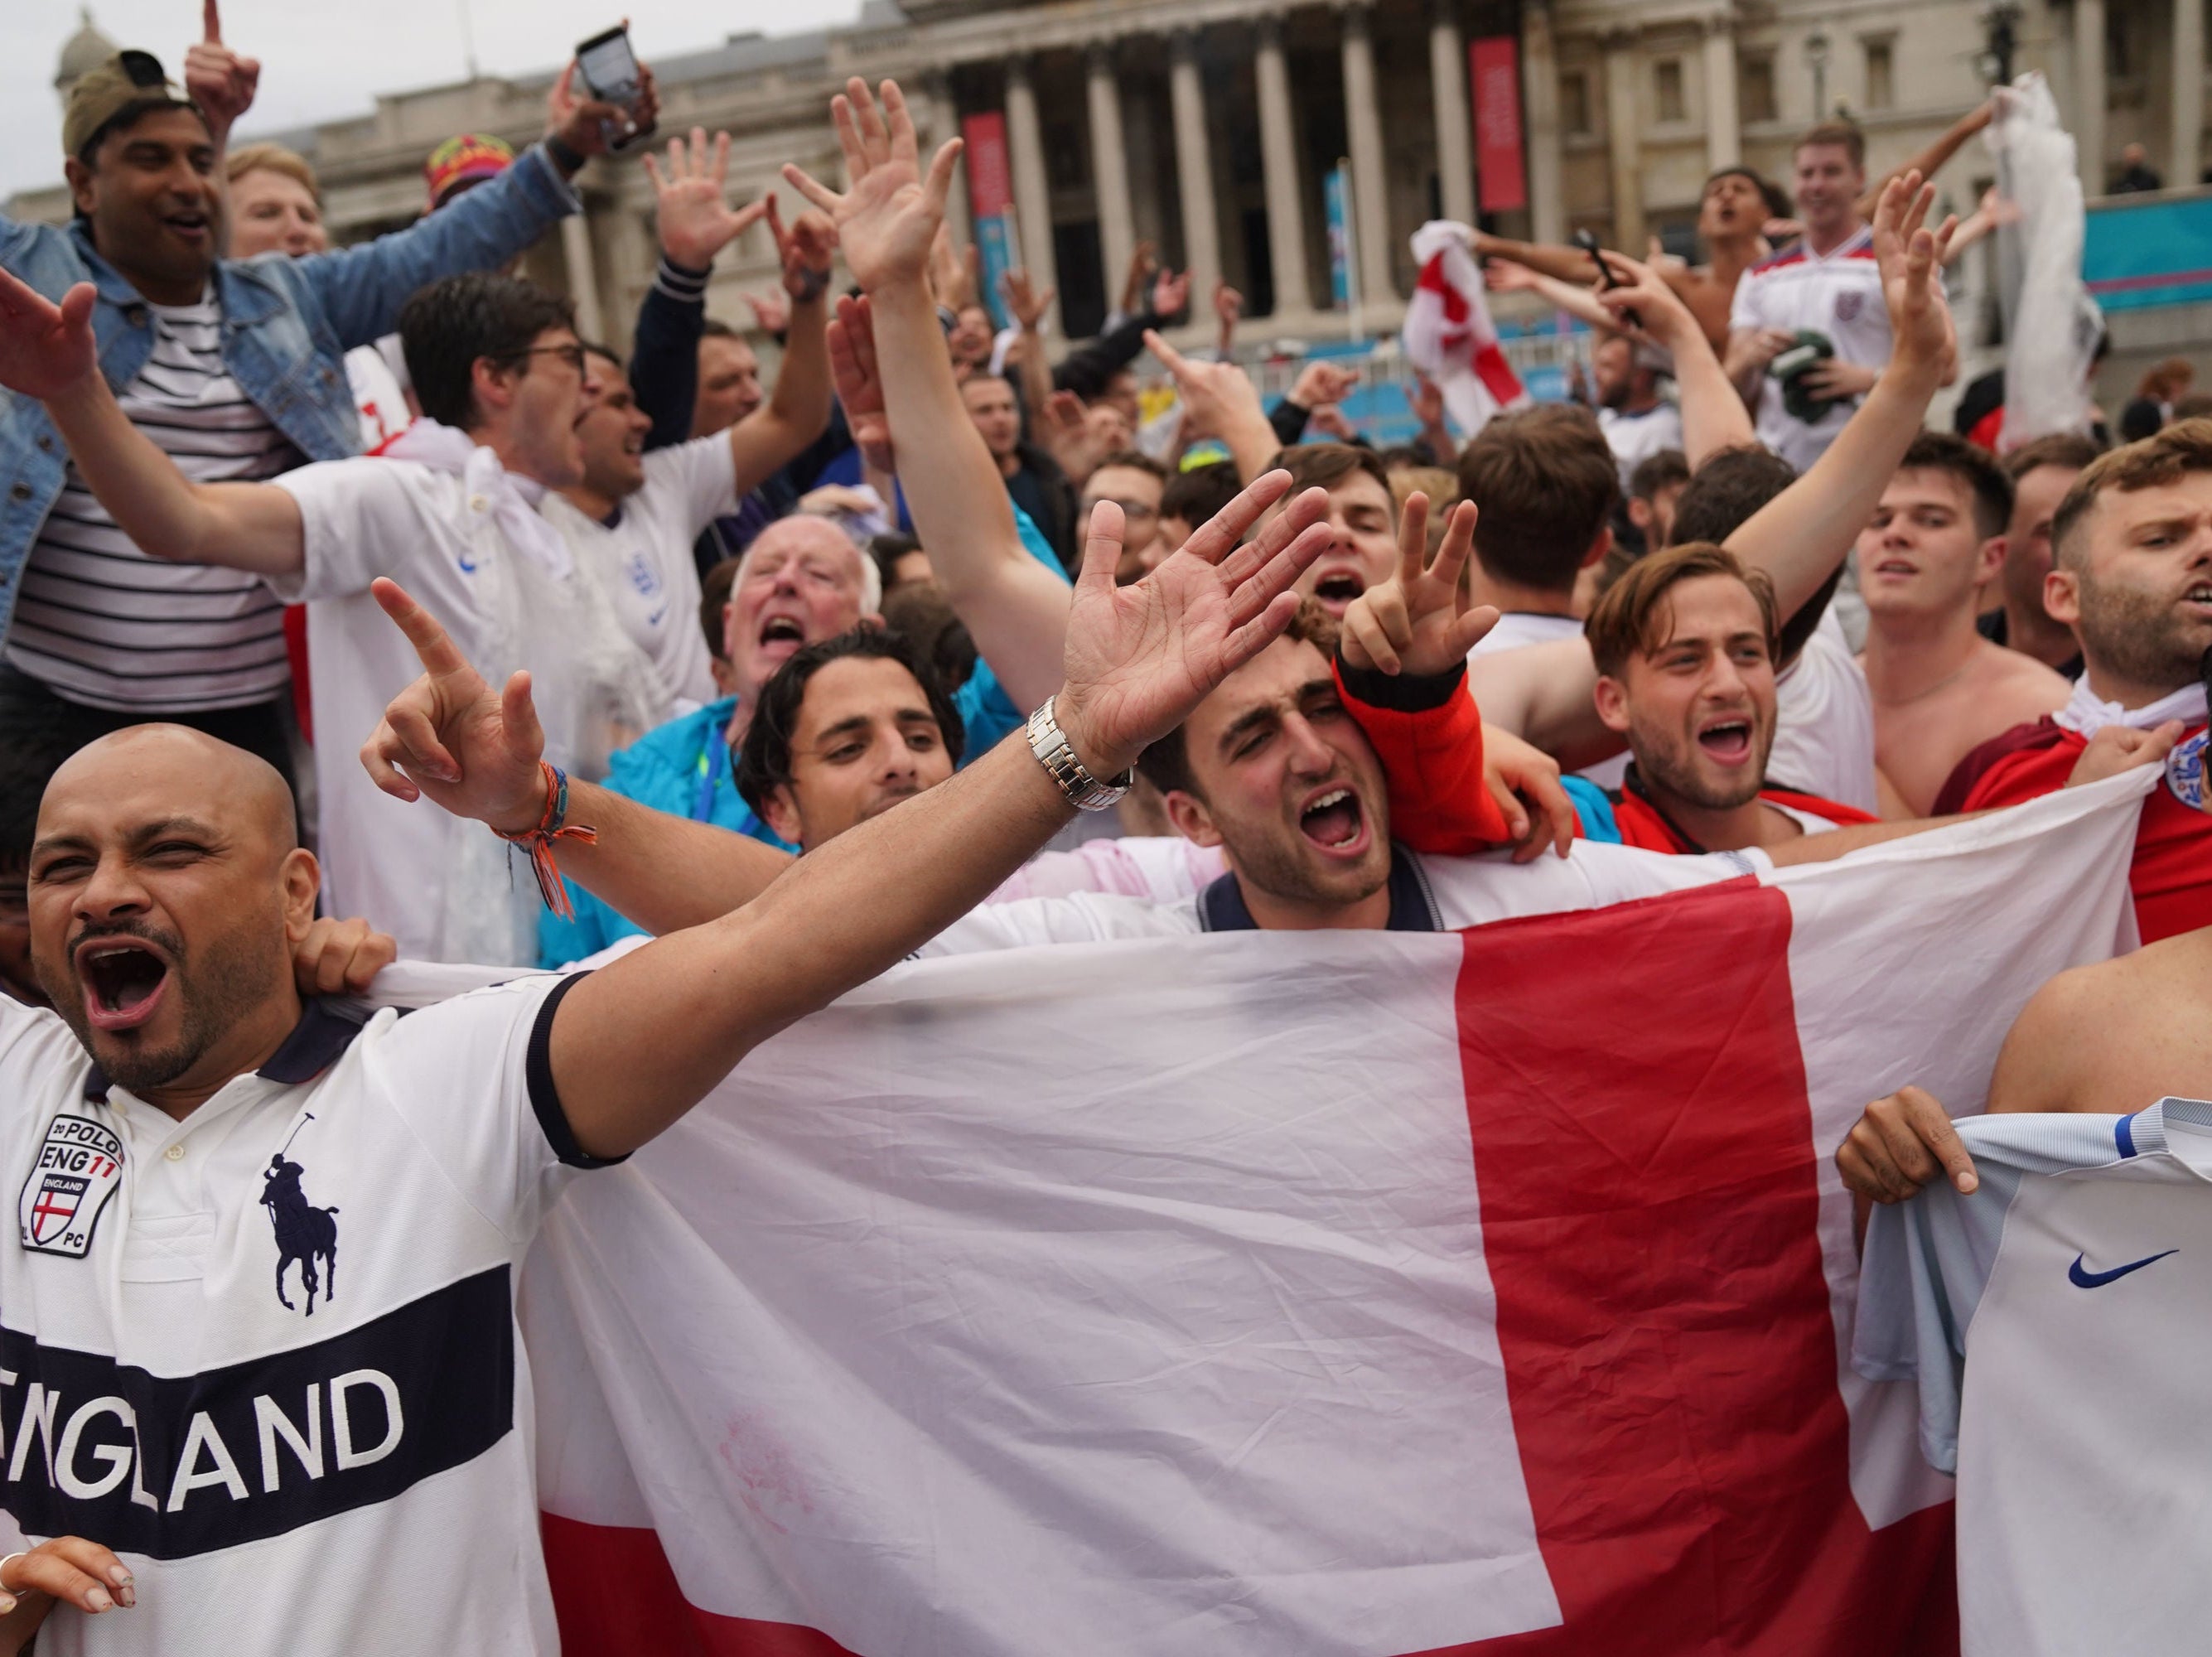 England fans celebrate in Trafalgar Square after England beat Germany 2-0 on Tuesday